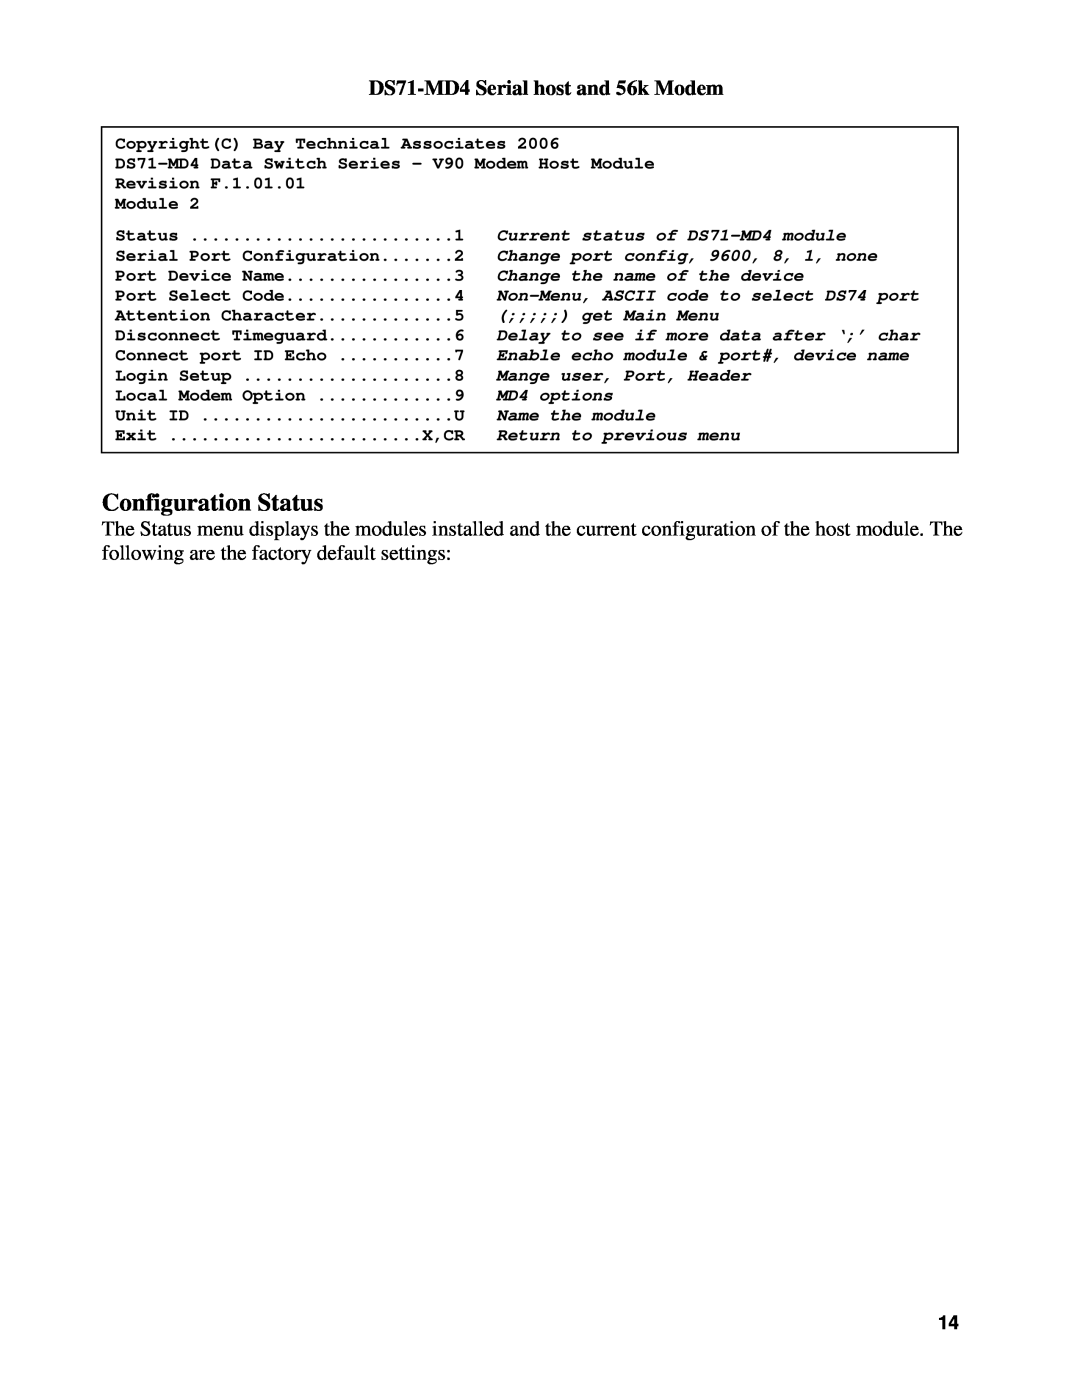 Cisco Systems DS Series manual Configuration Status, DS71-MD4 Serial host and 56k Modem 